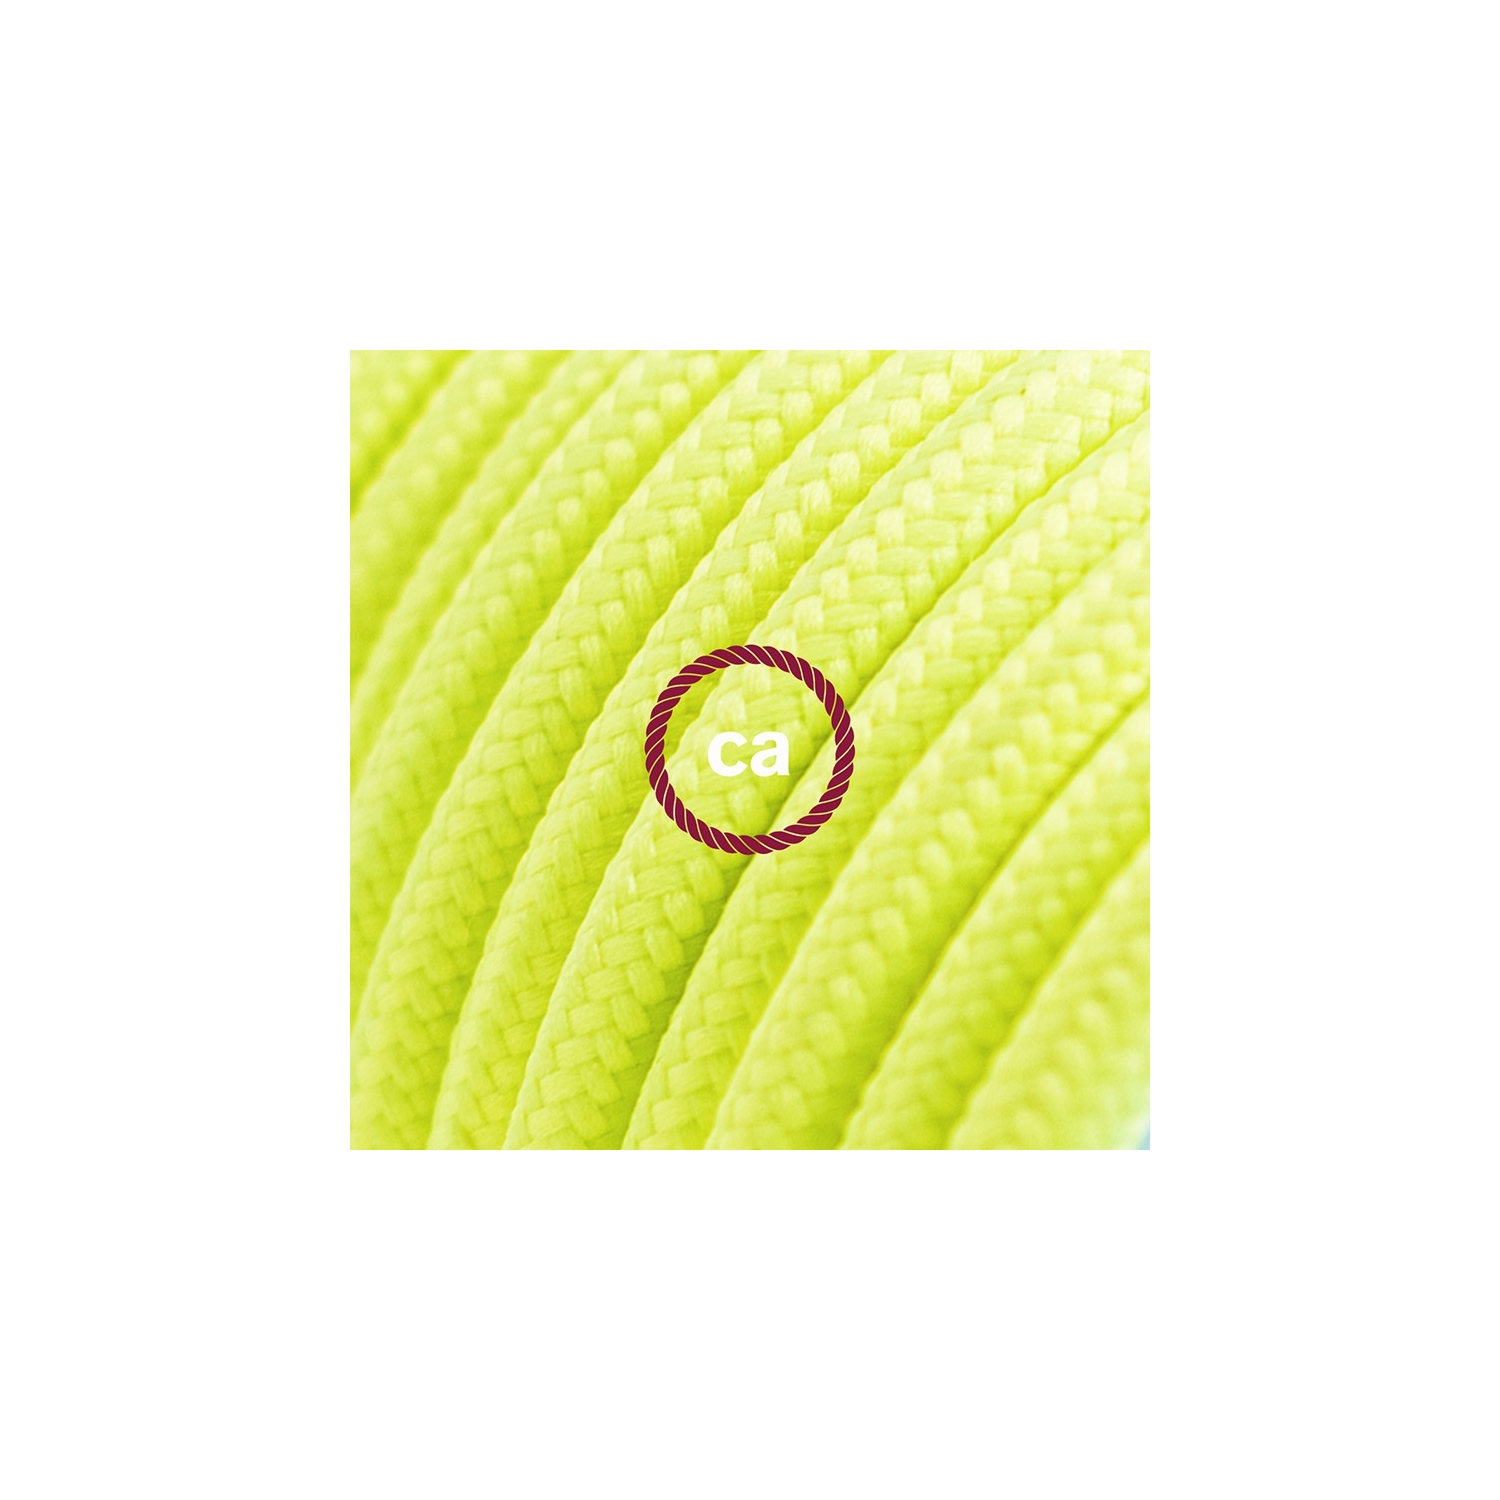 Power Cord with foot switch, RF10 Neon Yellow - Choose color of switch/plug